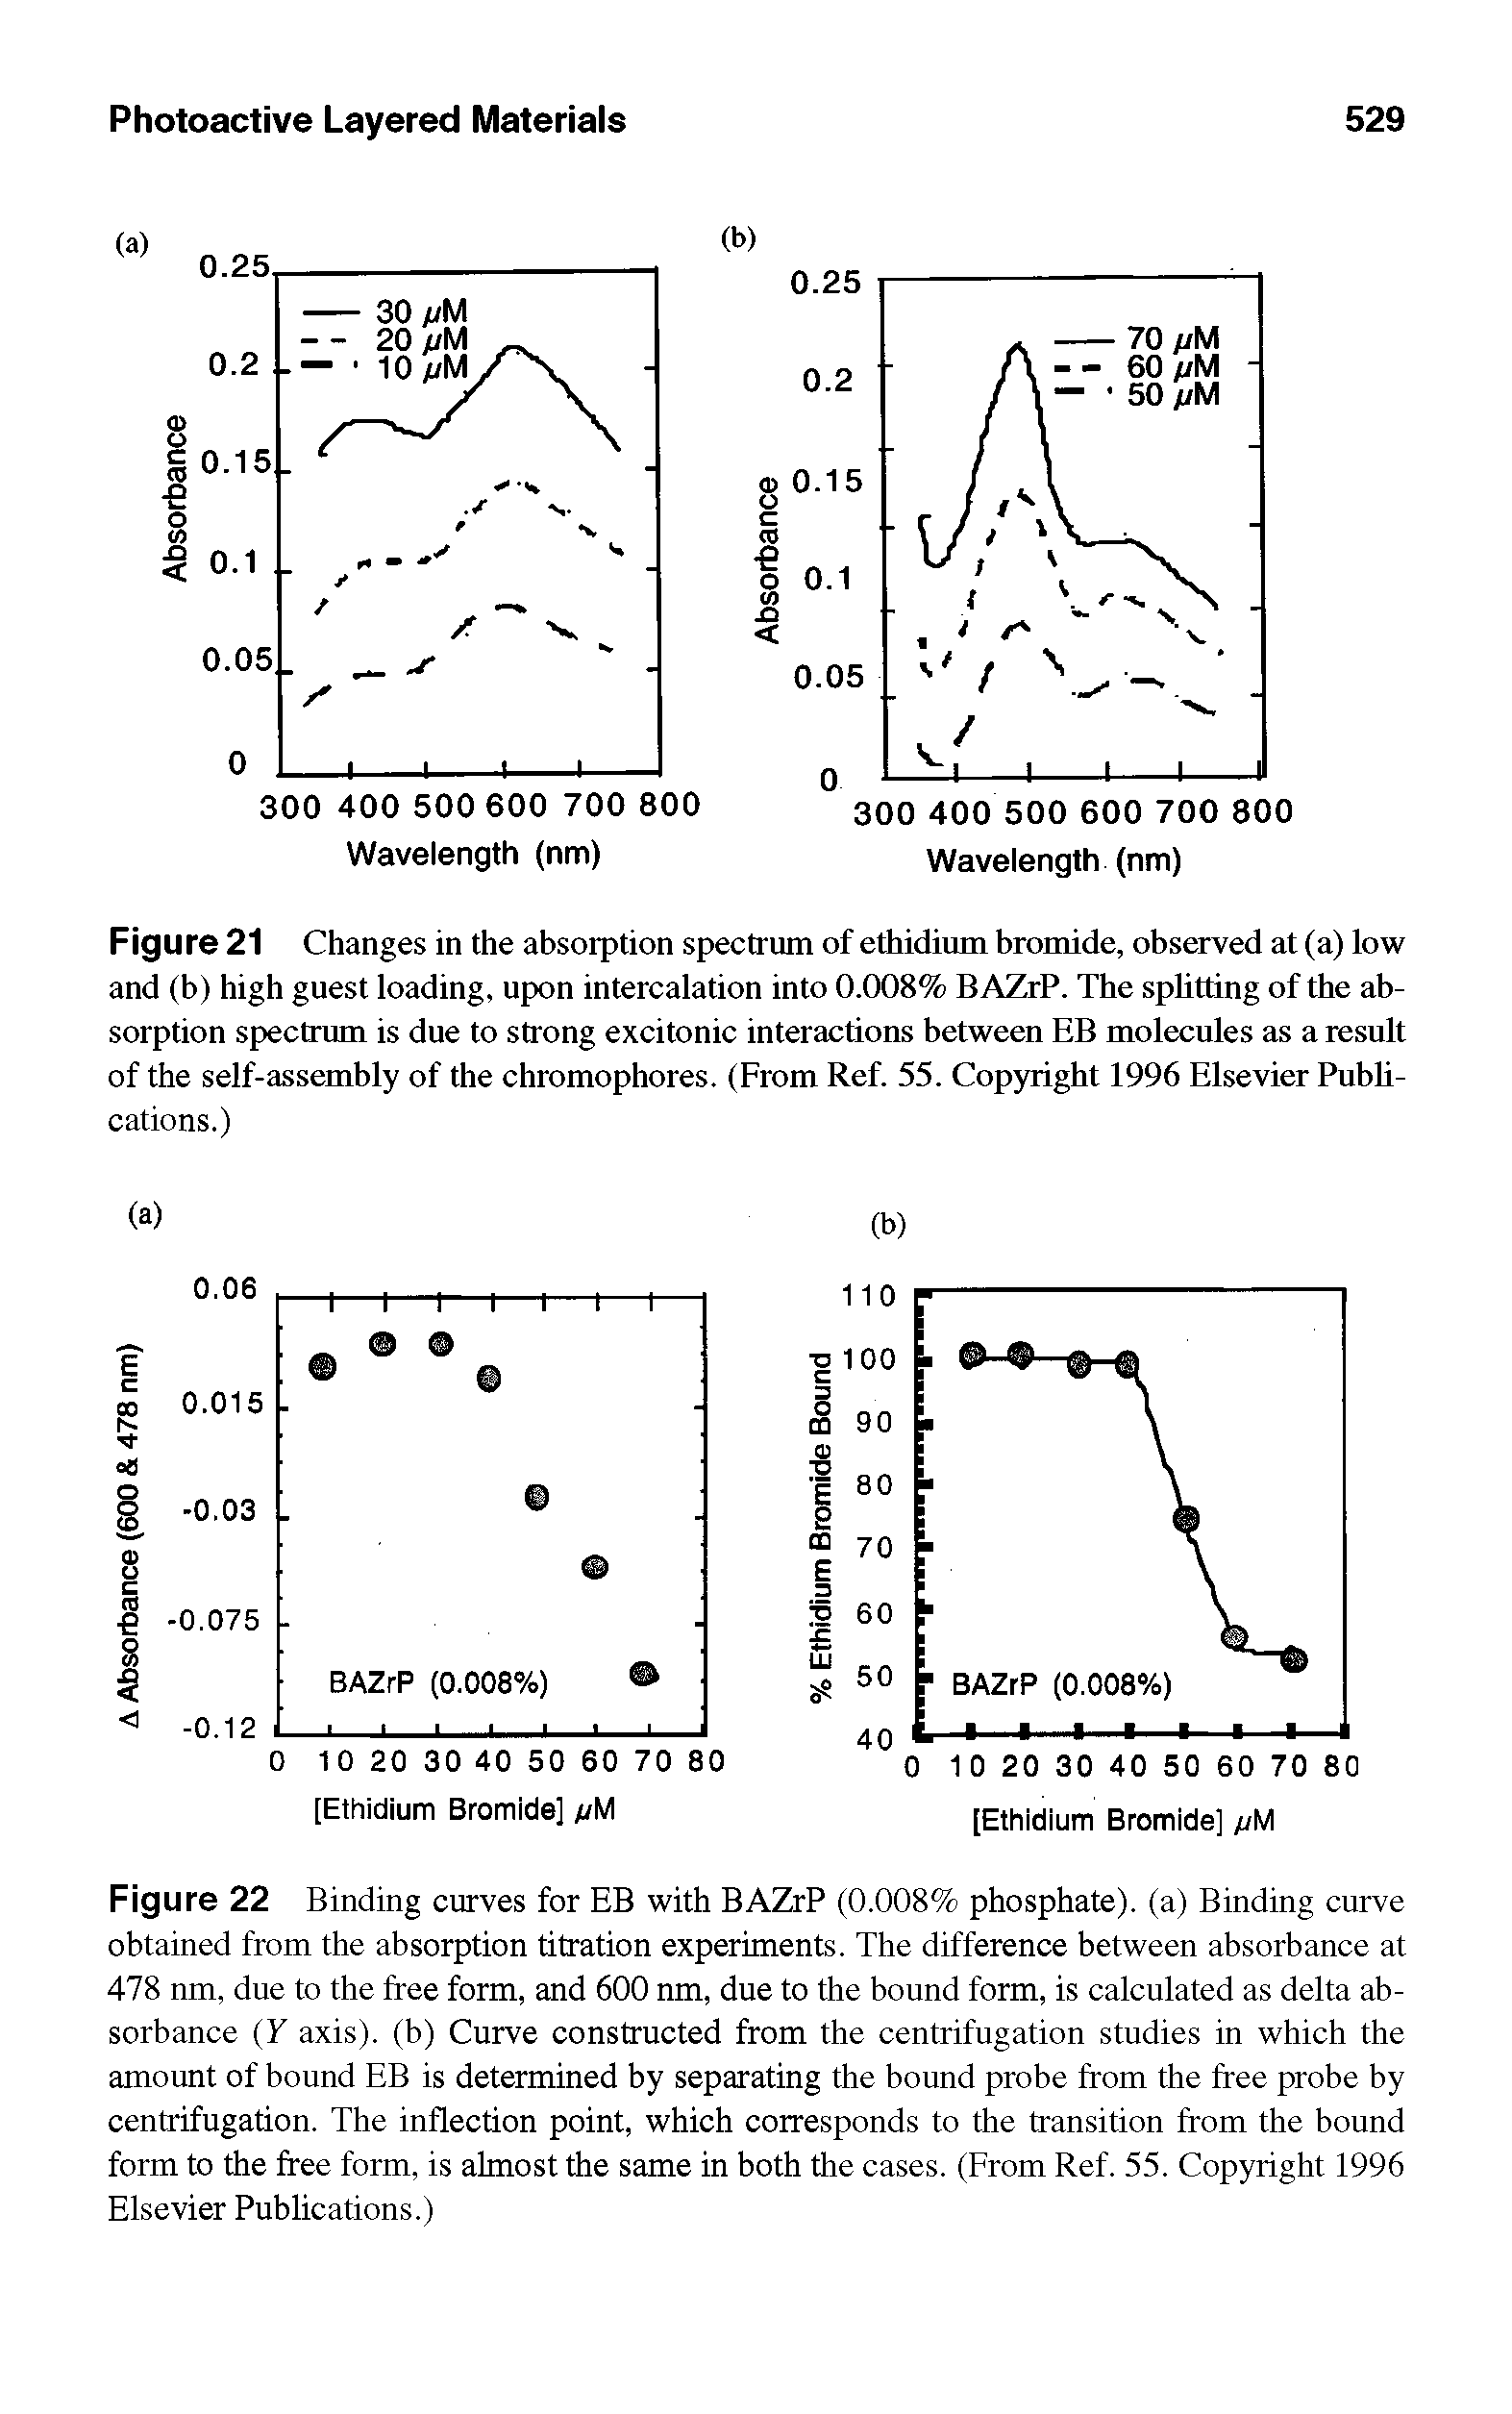 Figure 21 Changes in the absorption spectrum of ethidium bromide, observed at (a) low and (b) high guest loading, upon intercalation into 0.008% BAZrP. The splitting of the absorption spectrum is due to strong excitonic interactions between EB molecules as a result of the self-assembly of the chromophores. (From Ref. 55. Copyright 1996 Elsevier Publications.)...